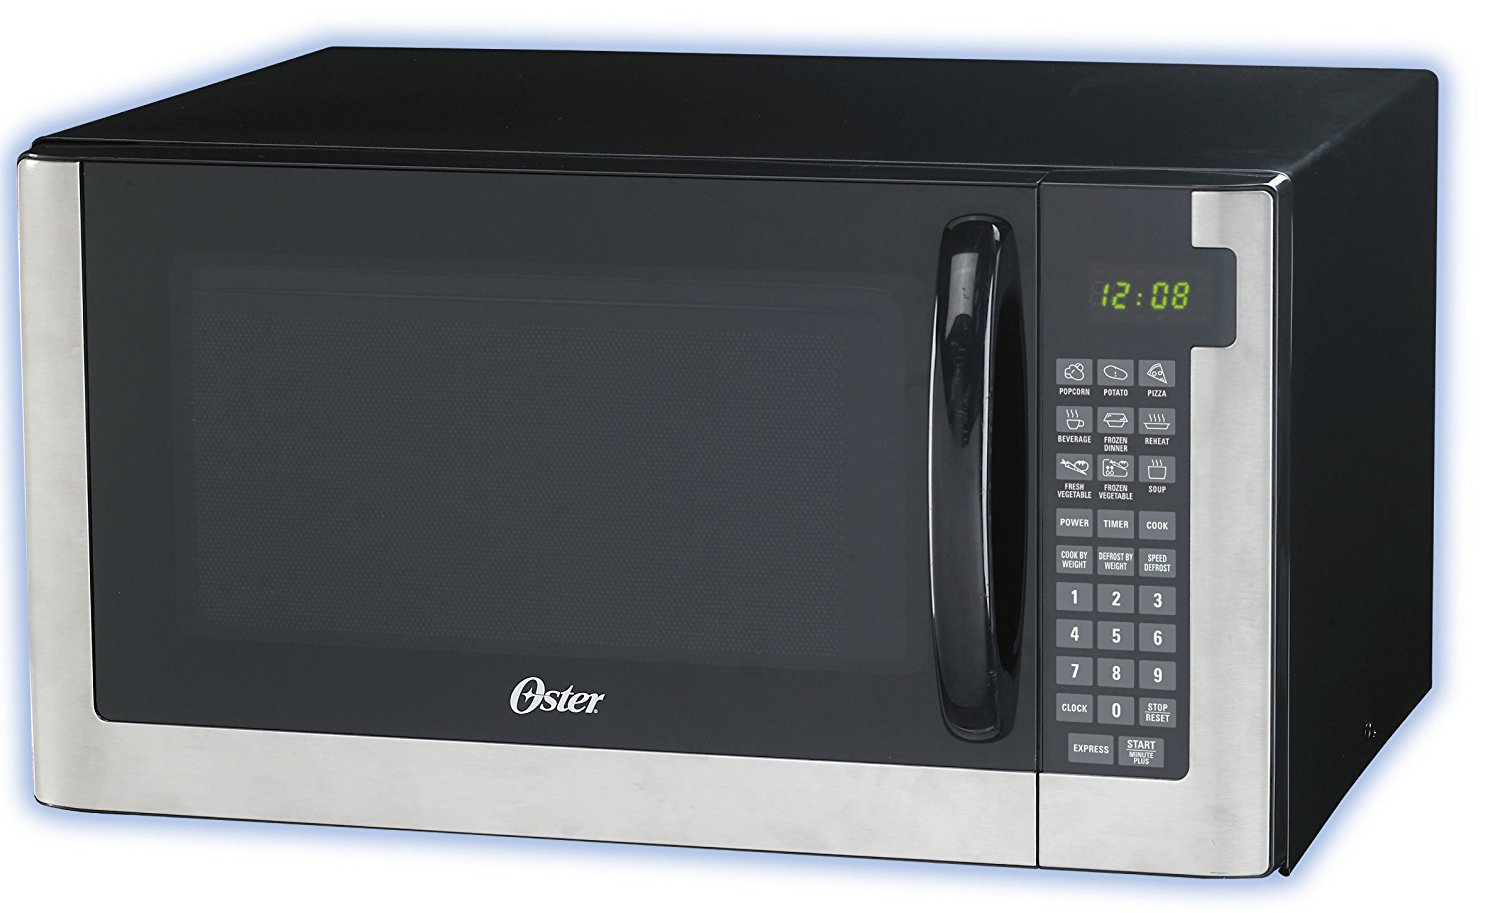 Oster OGG61403 1-2/5-Cubic-Feet Microwave Oven Review